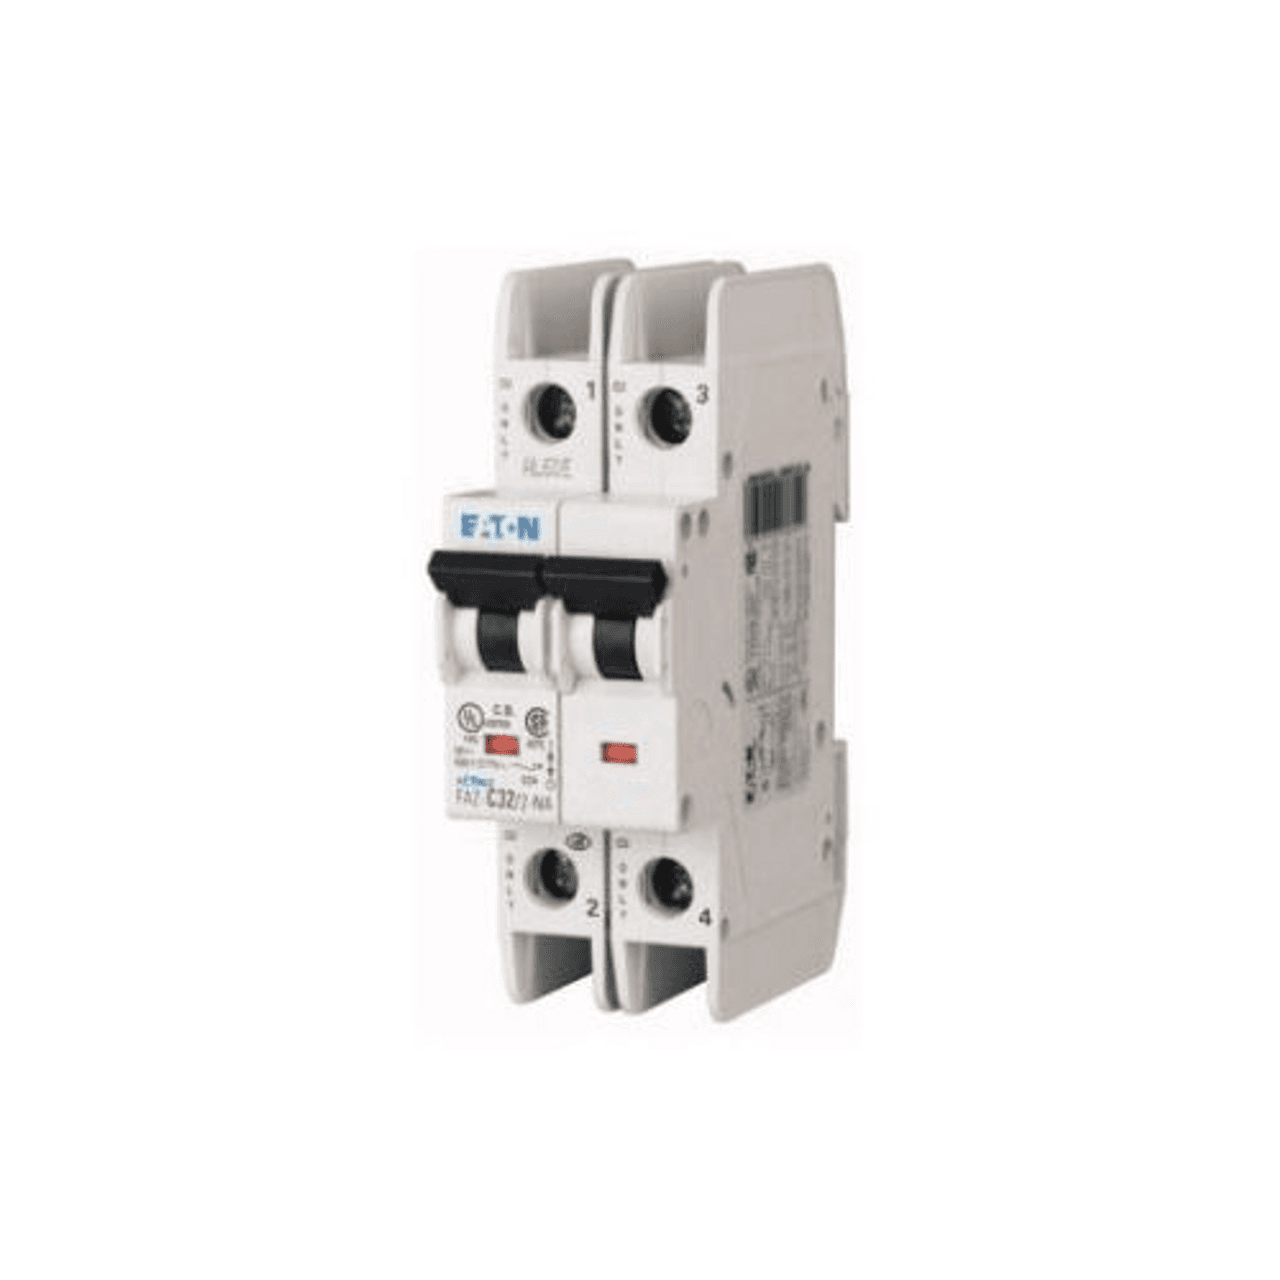 Eaton FAZ-C5/2-NA 277/480 VAC 50/60 Hz, 5 A, 2-Pole, 10/14 kA, 5 to 10 x Rated Current, Screw Terminal, DIN Rail Mount, Standard Packaging, C-Curve, Current Limiting, Thermal Magnetic